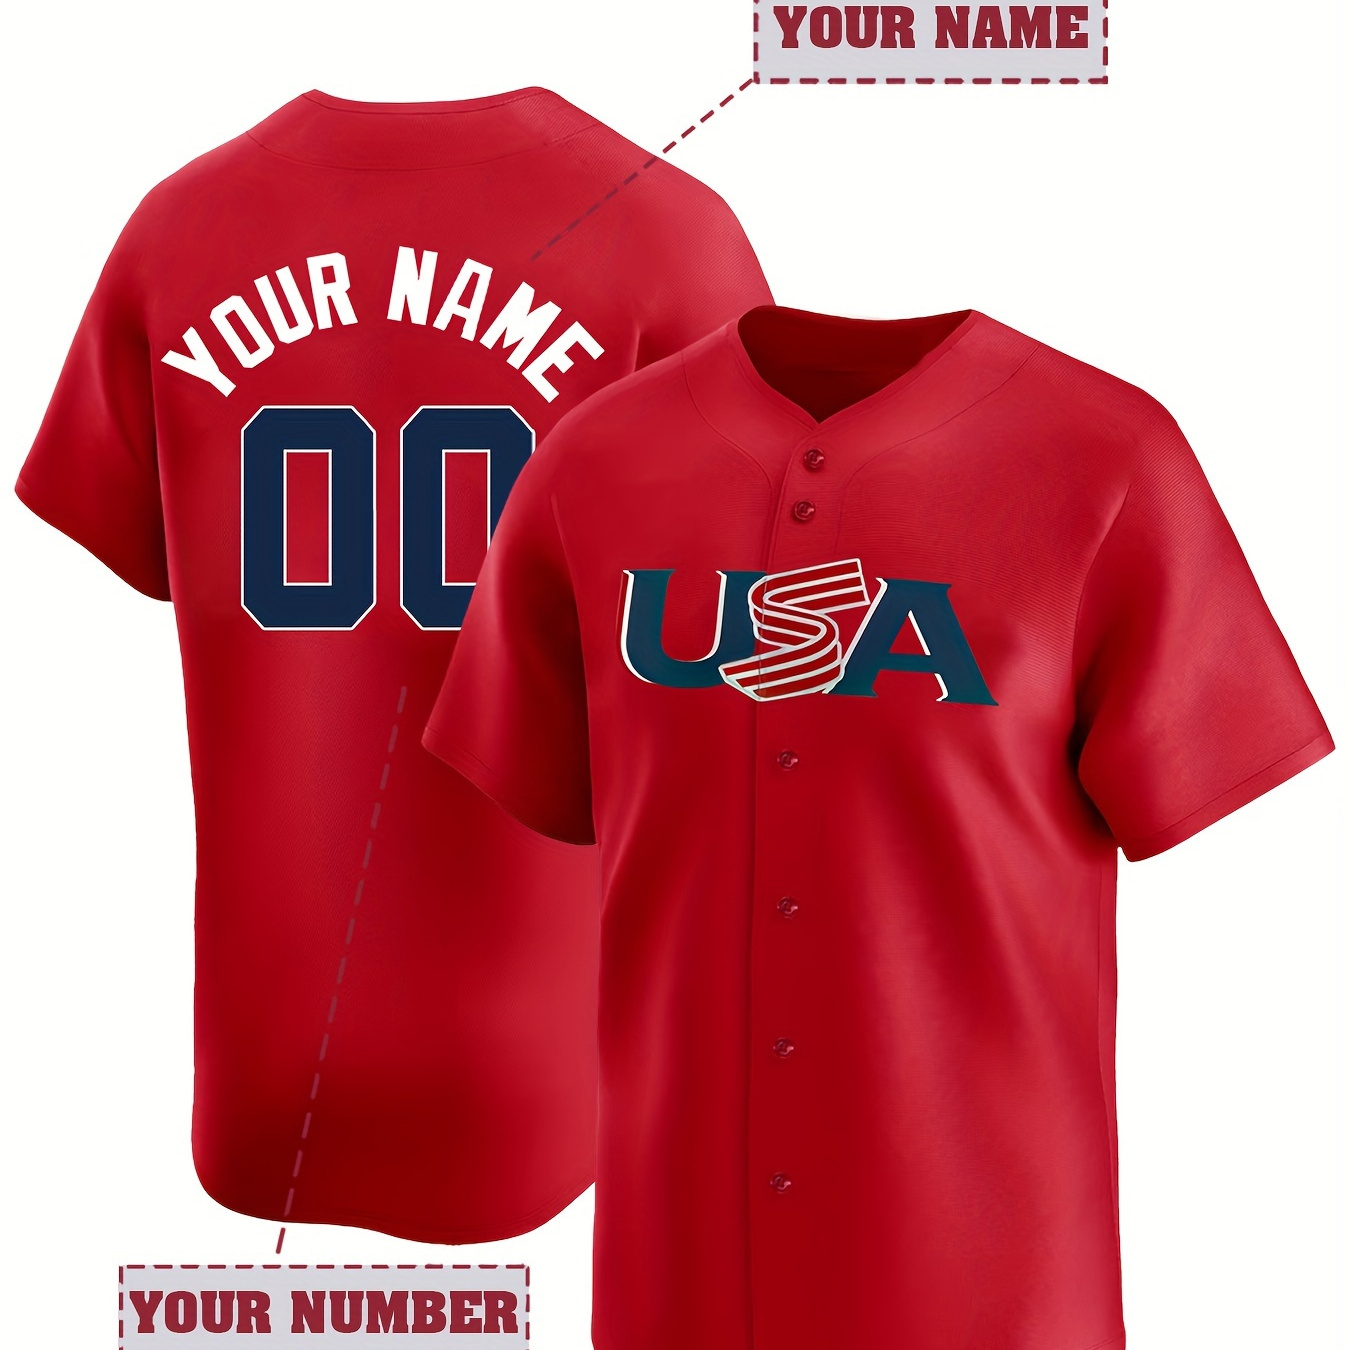 

Men's Customized Name And Number Embroidery Short Sleeve Button Up Baseball Jersey, "usa" Print Stylish Sports Tops For Summer Training, Match And Outdoors Wear